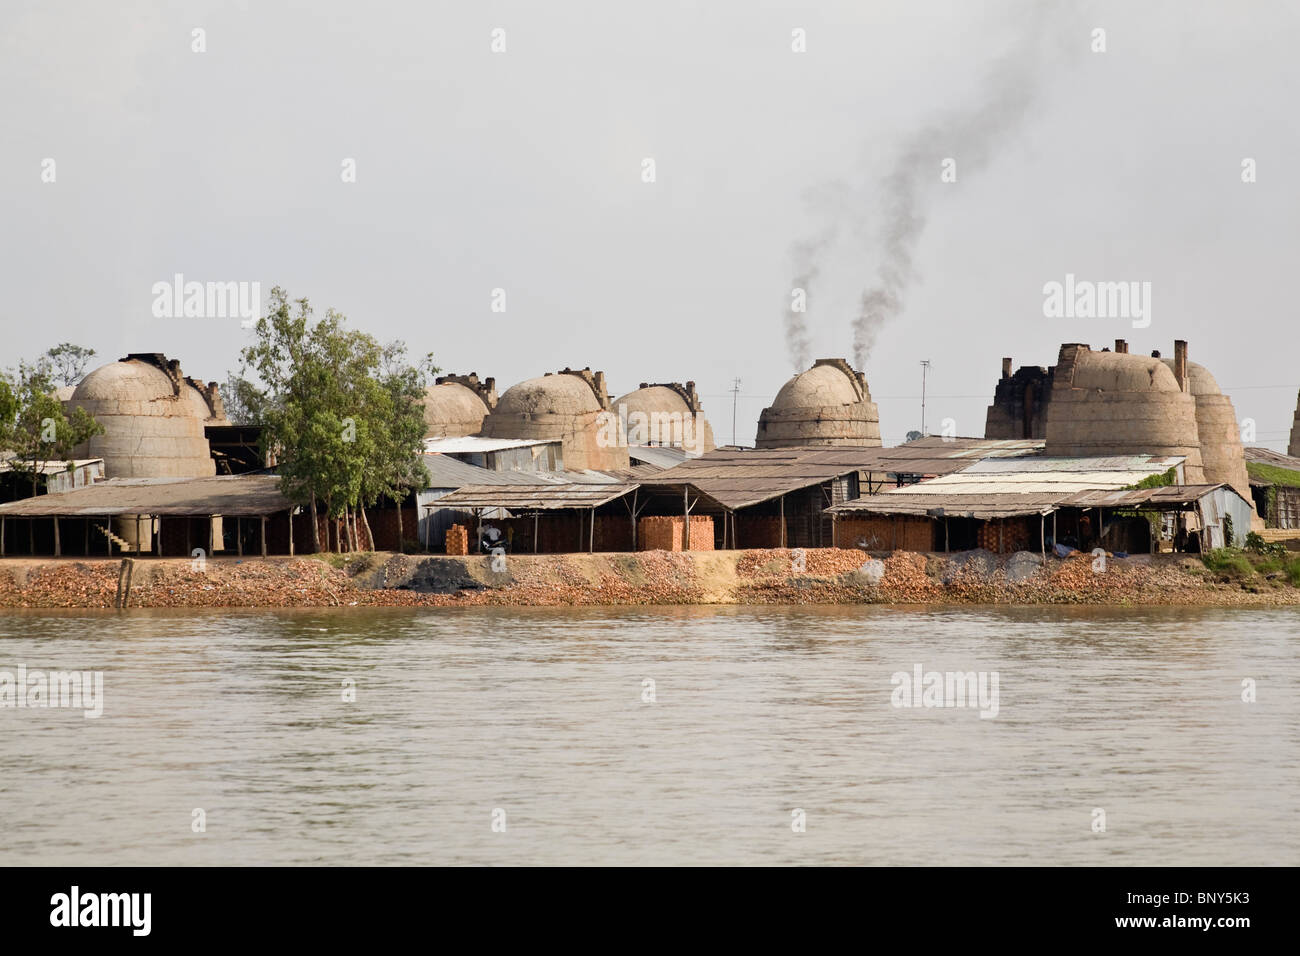 Brickworks on the Mekong River between Chau Doc and Cao Lanh, Mekong Delta Region, Vietnam Stock Photo